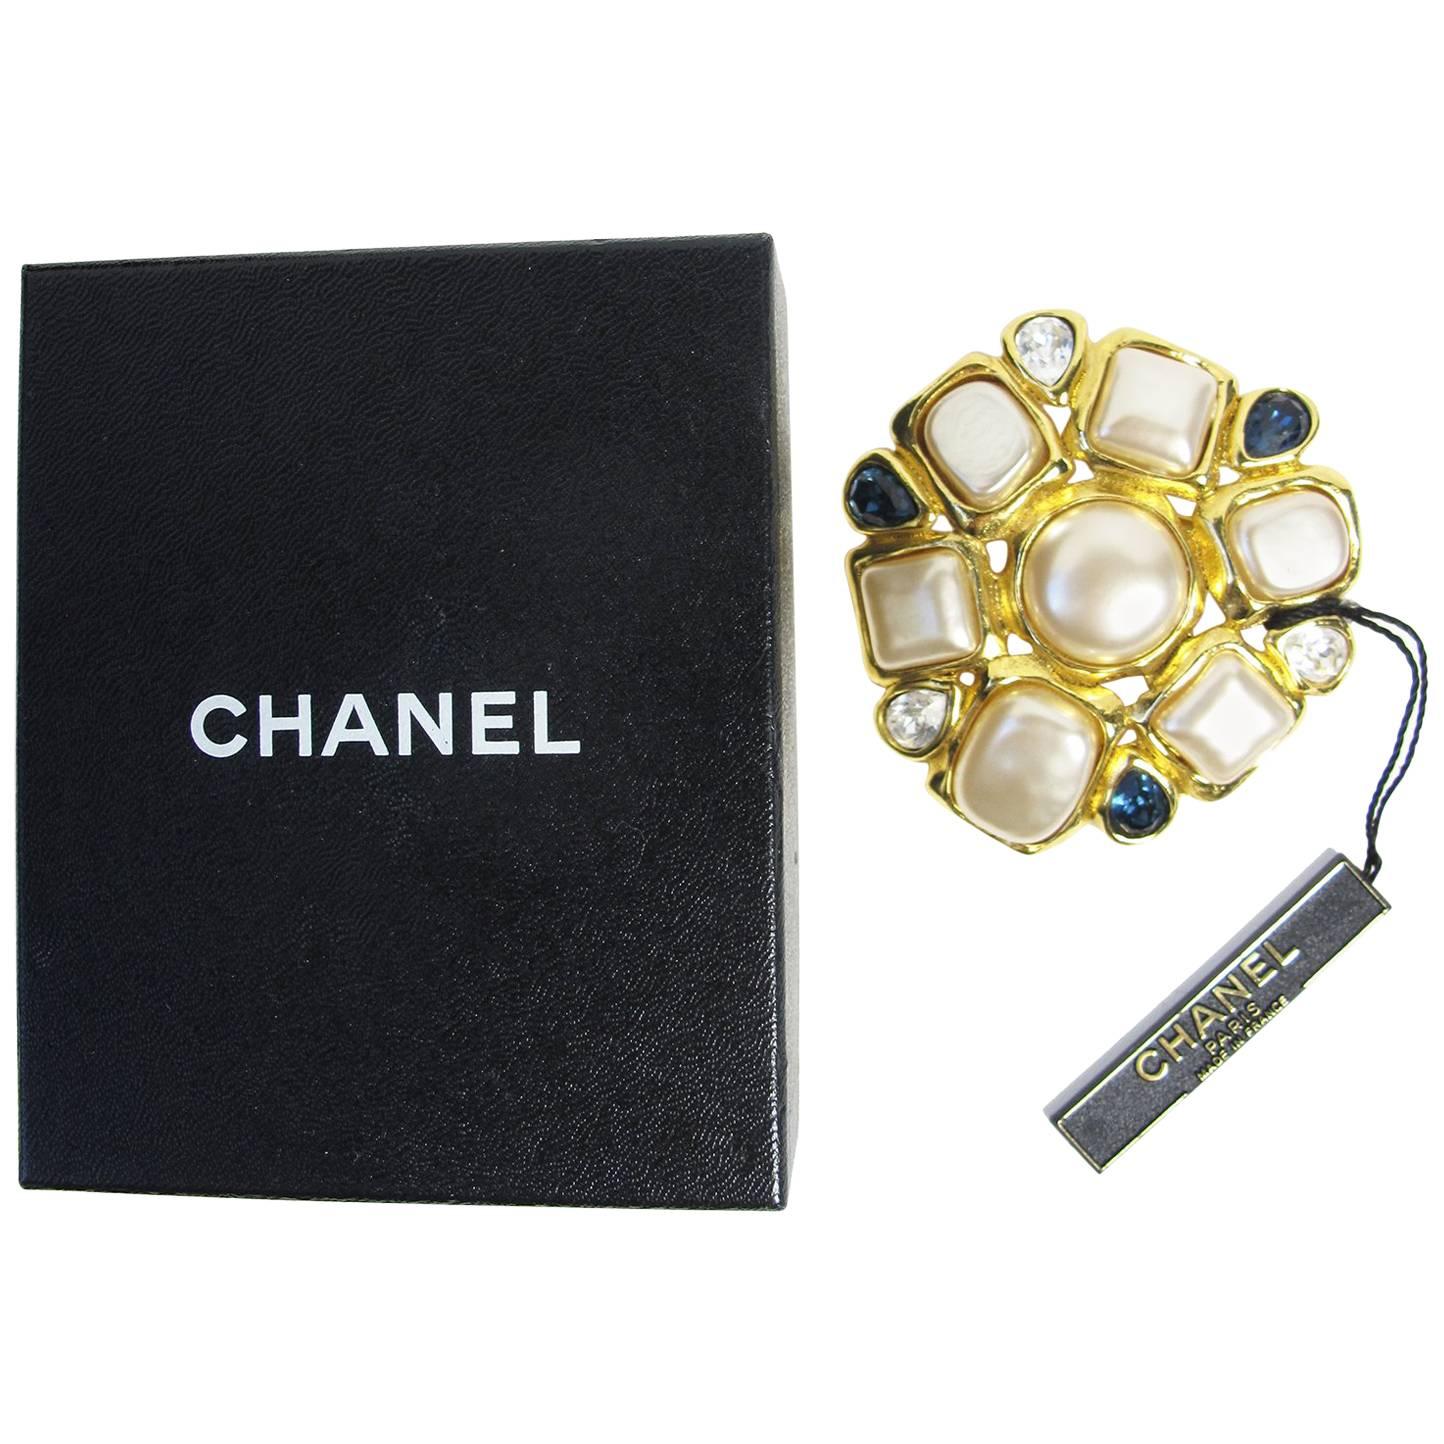 Chanel Faux Pearl and Gripoix Large Brooch